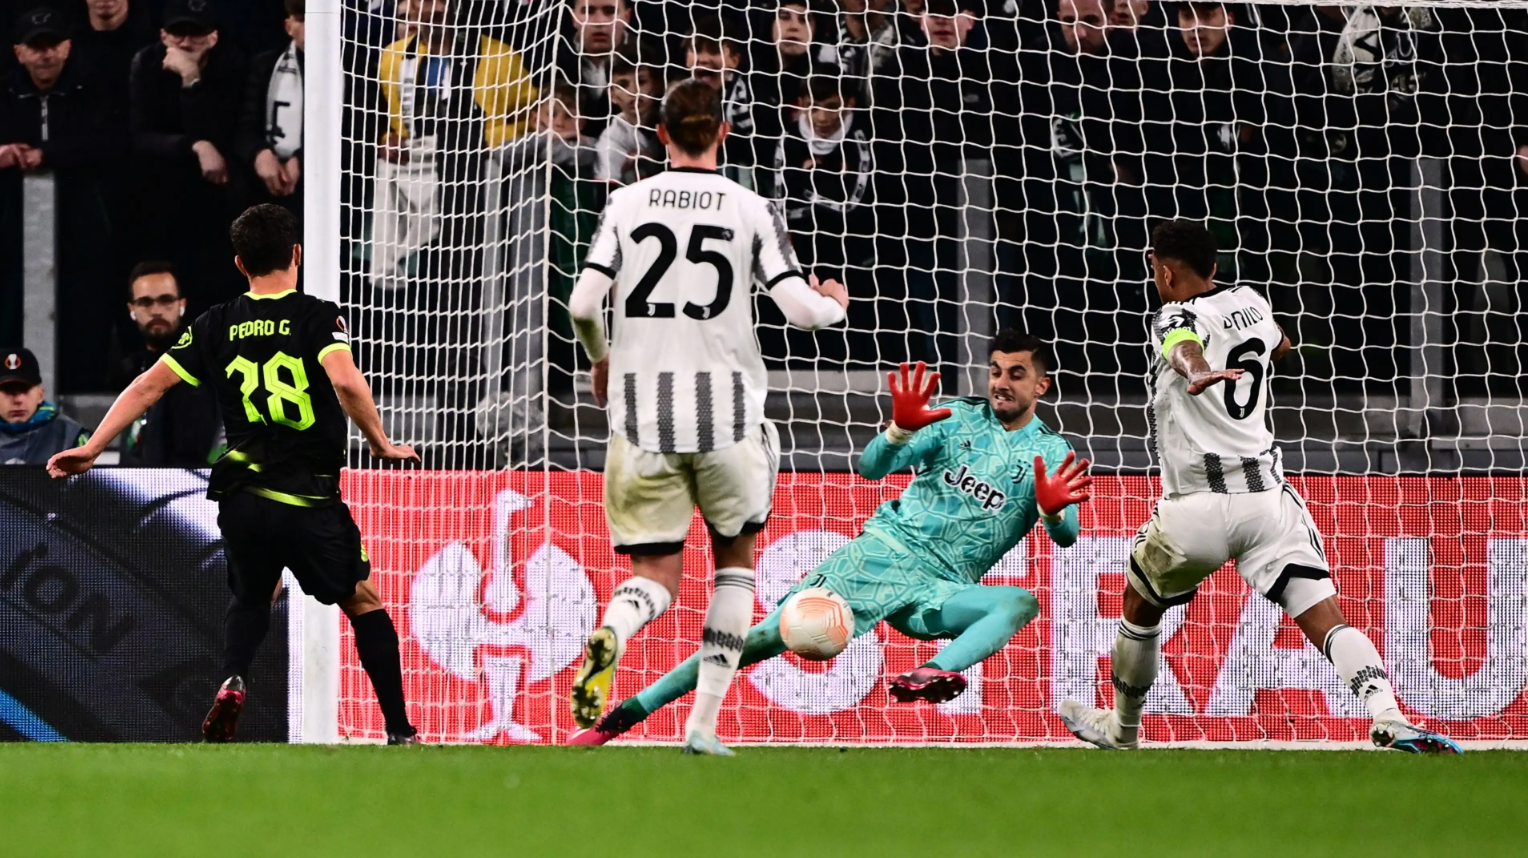 Juventus and Sporting CP are about to face off against each other at the Allianz Stadium in the first leg of their Europa League quarter-final tie